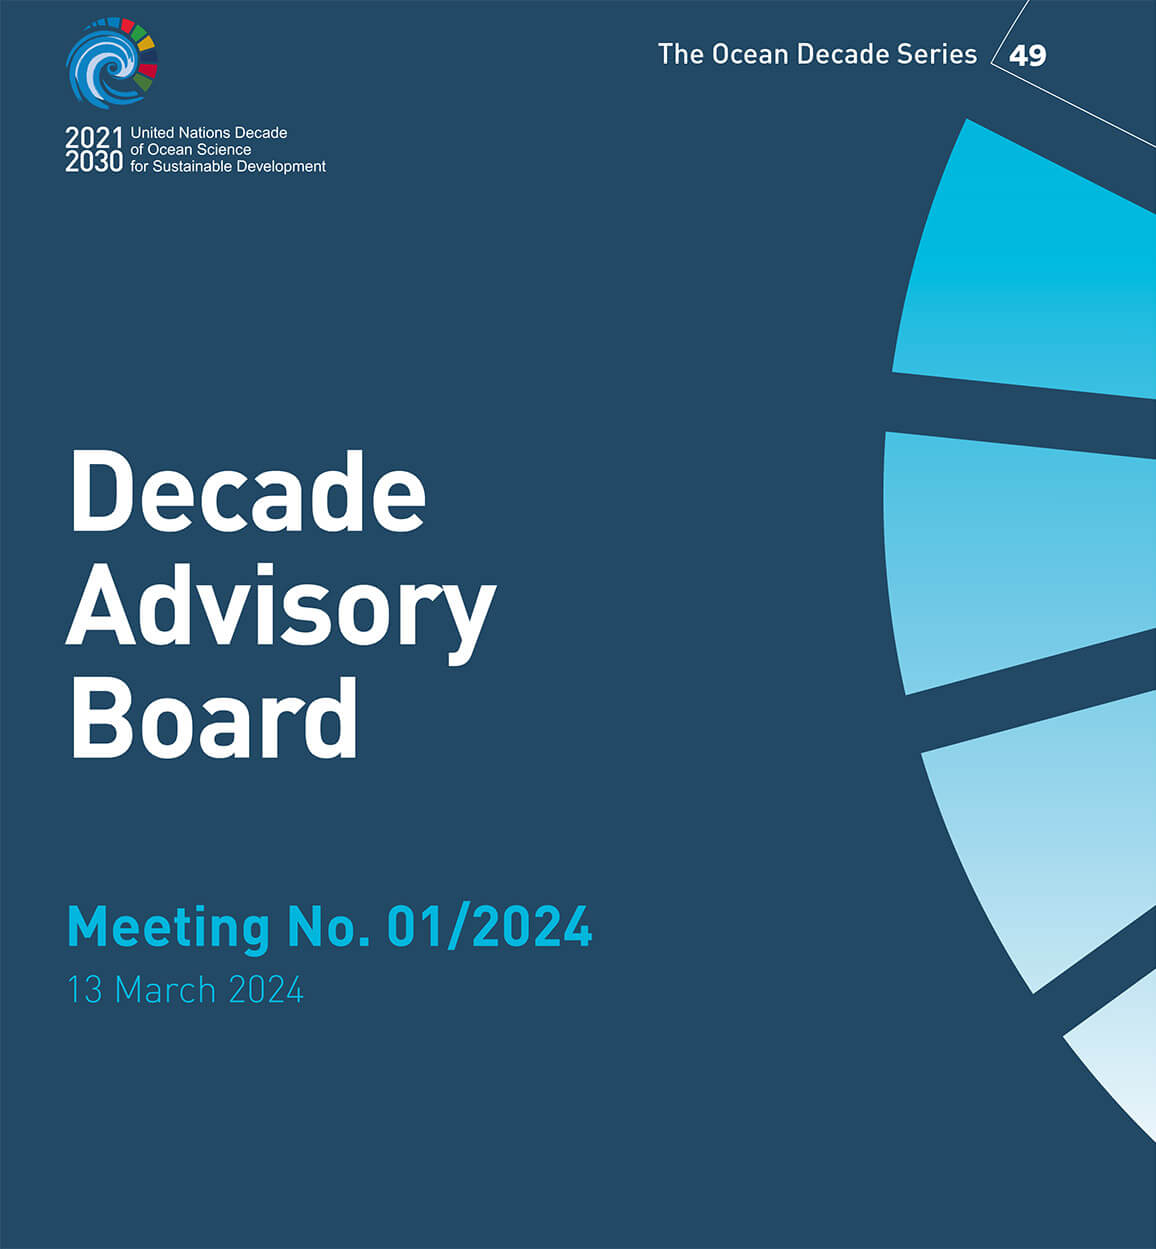 Report of the Eighth meeting of the Decade Advisory Board (13 March 2024)